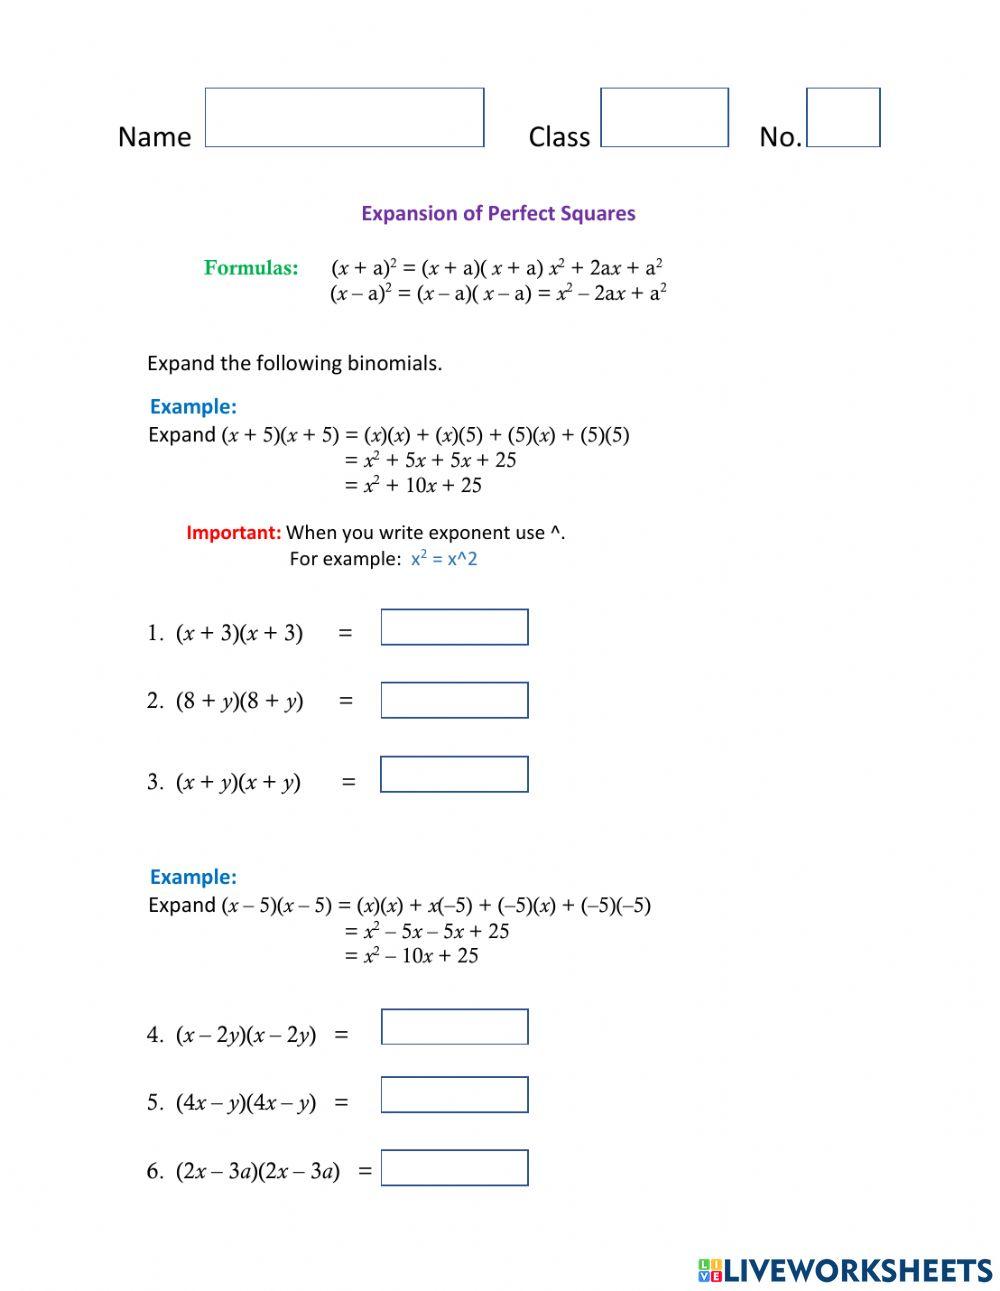 Expansion of Perfect Squares Worksheet